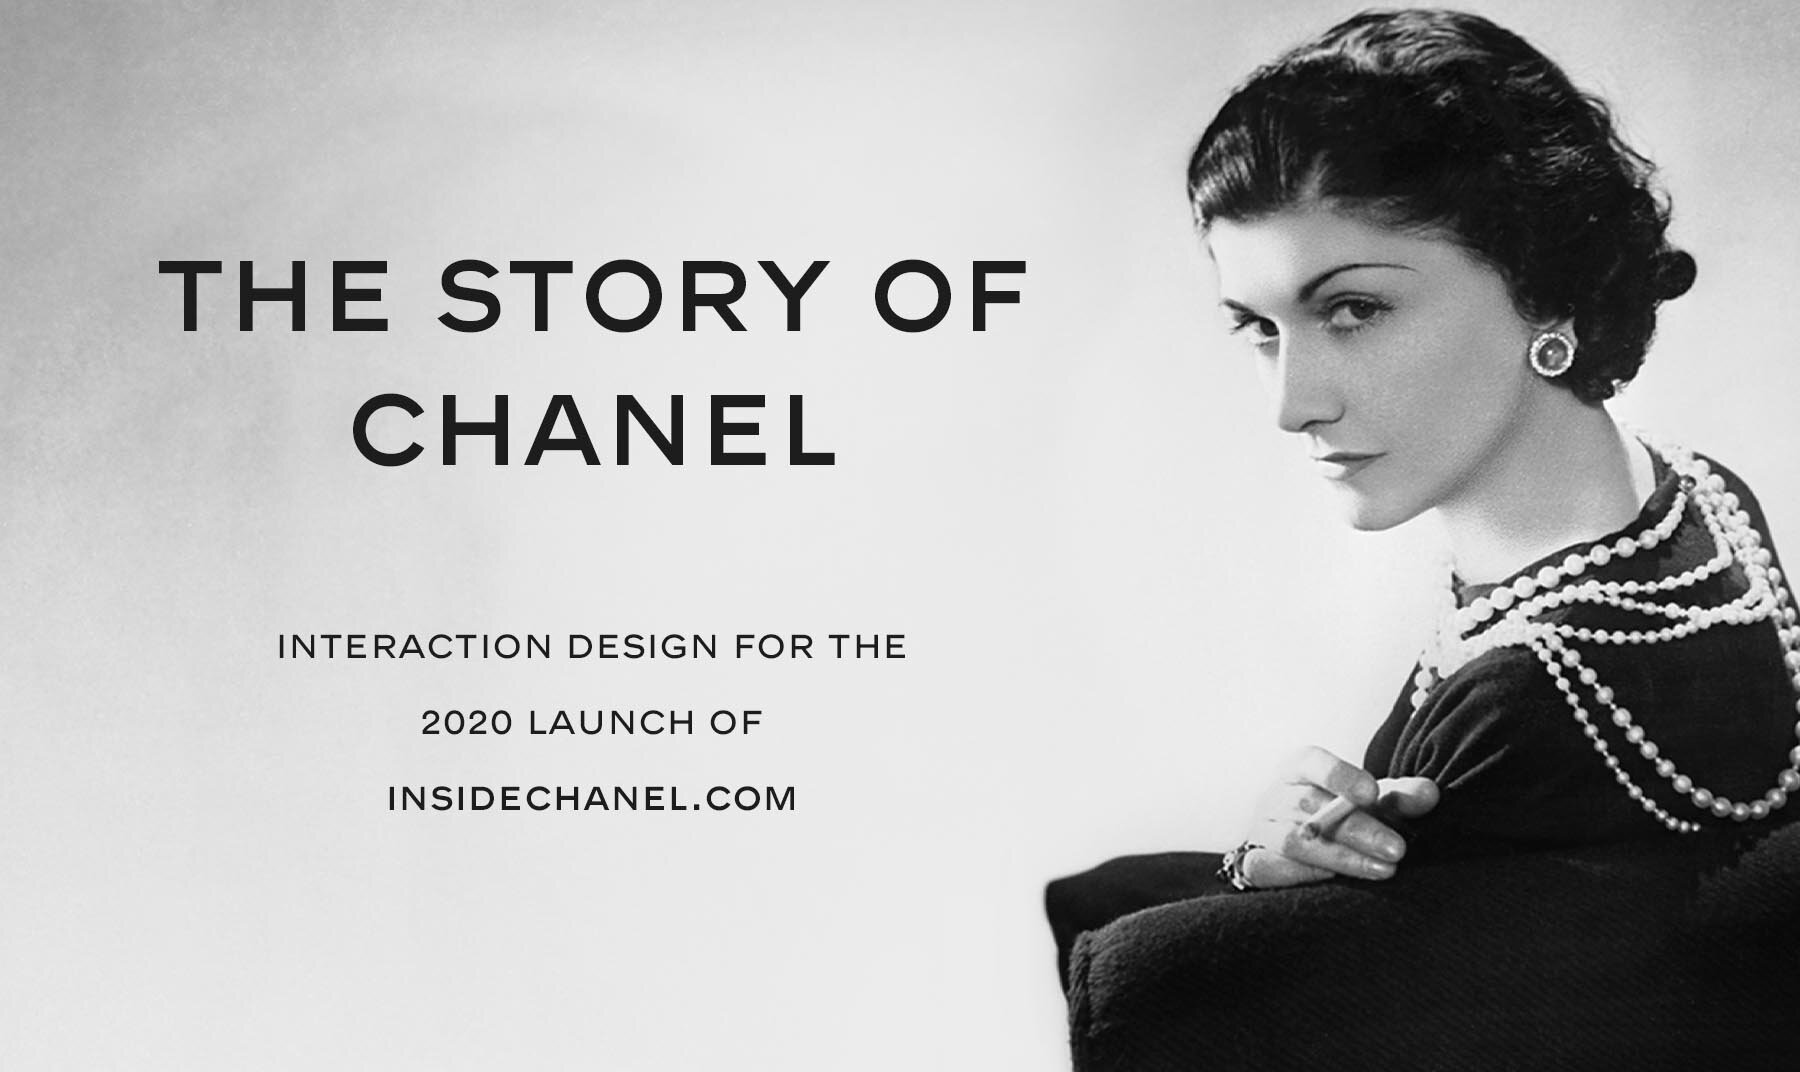 CHANEL - The CHANEL tone. An interplay of layering and discord